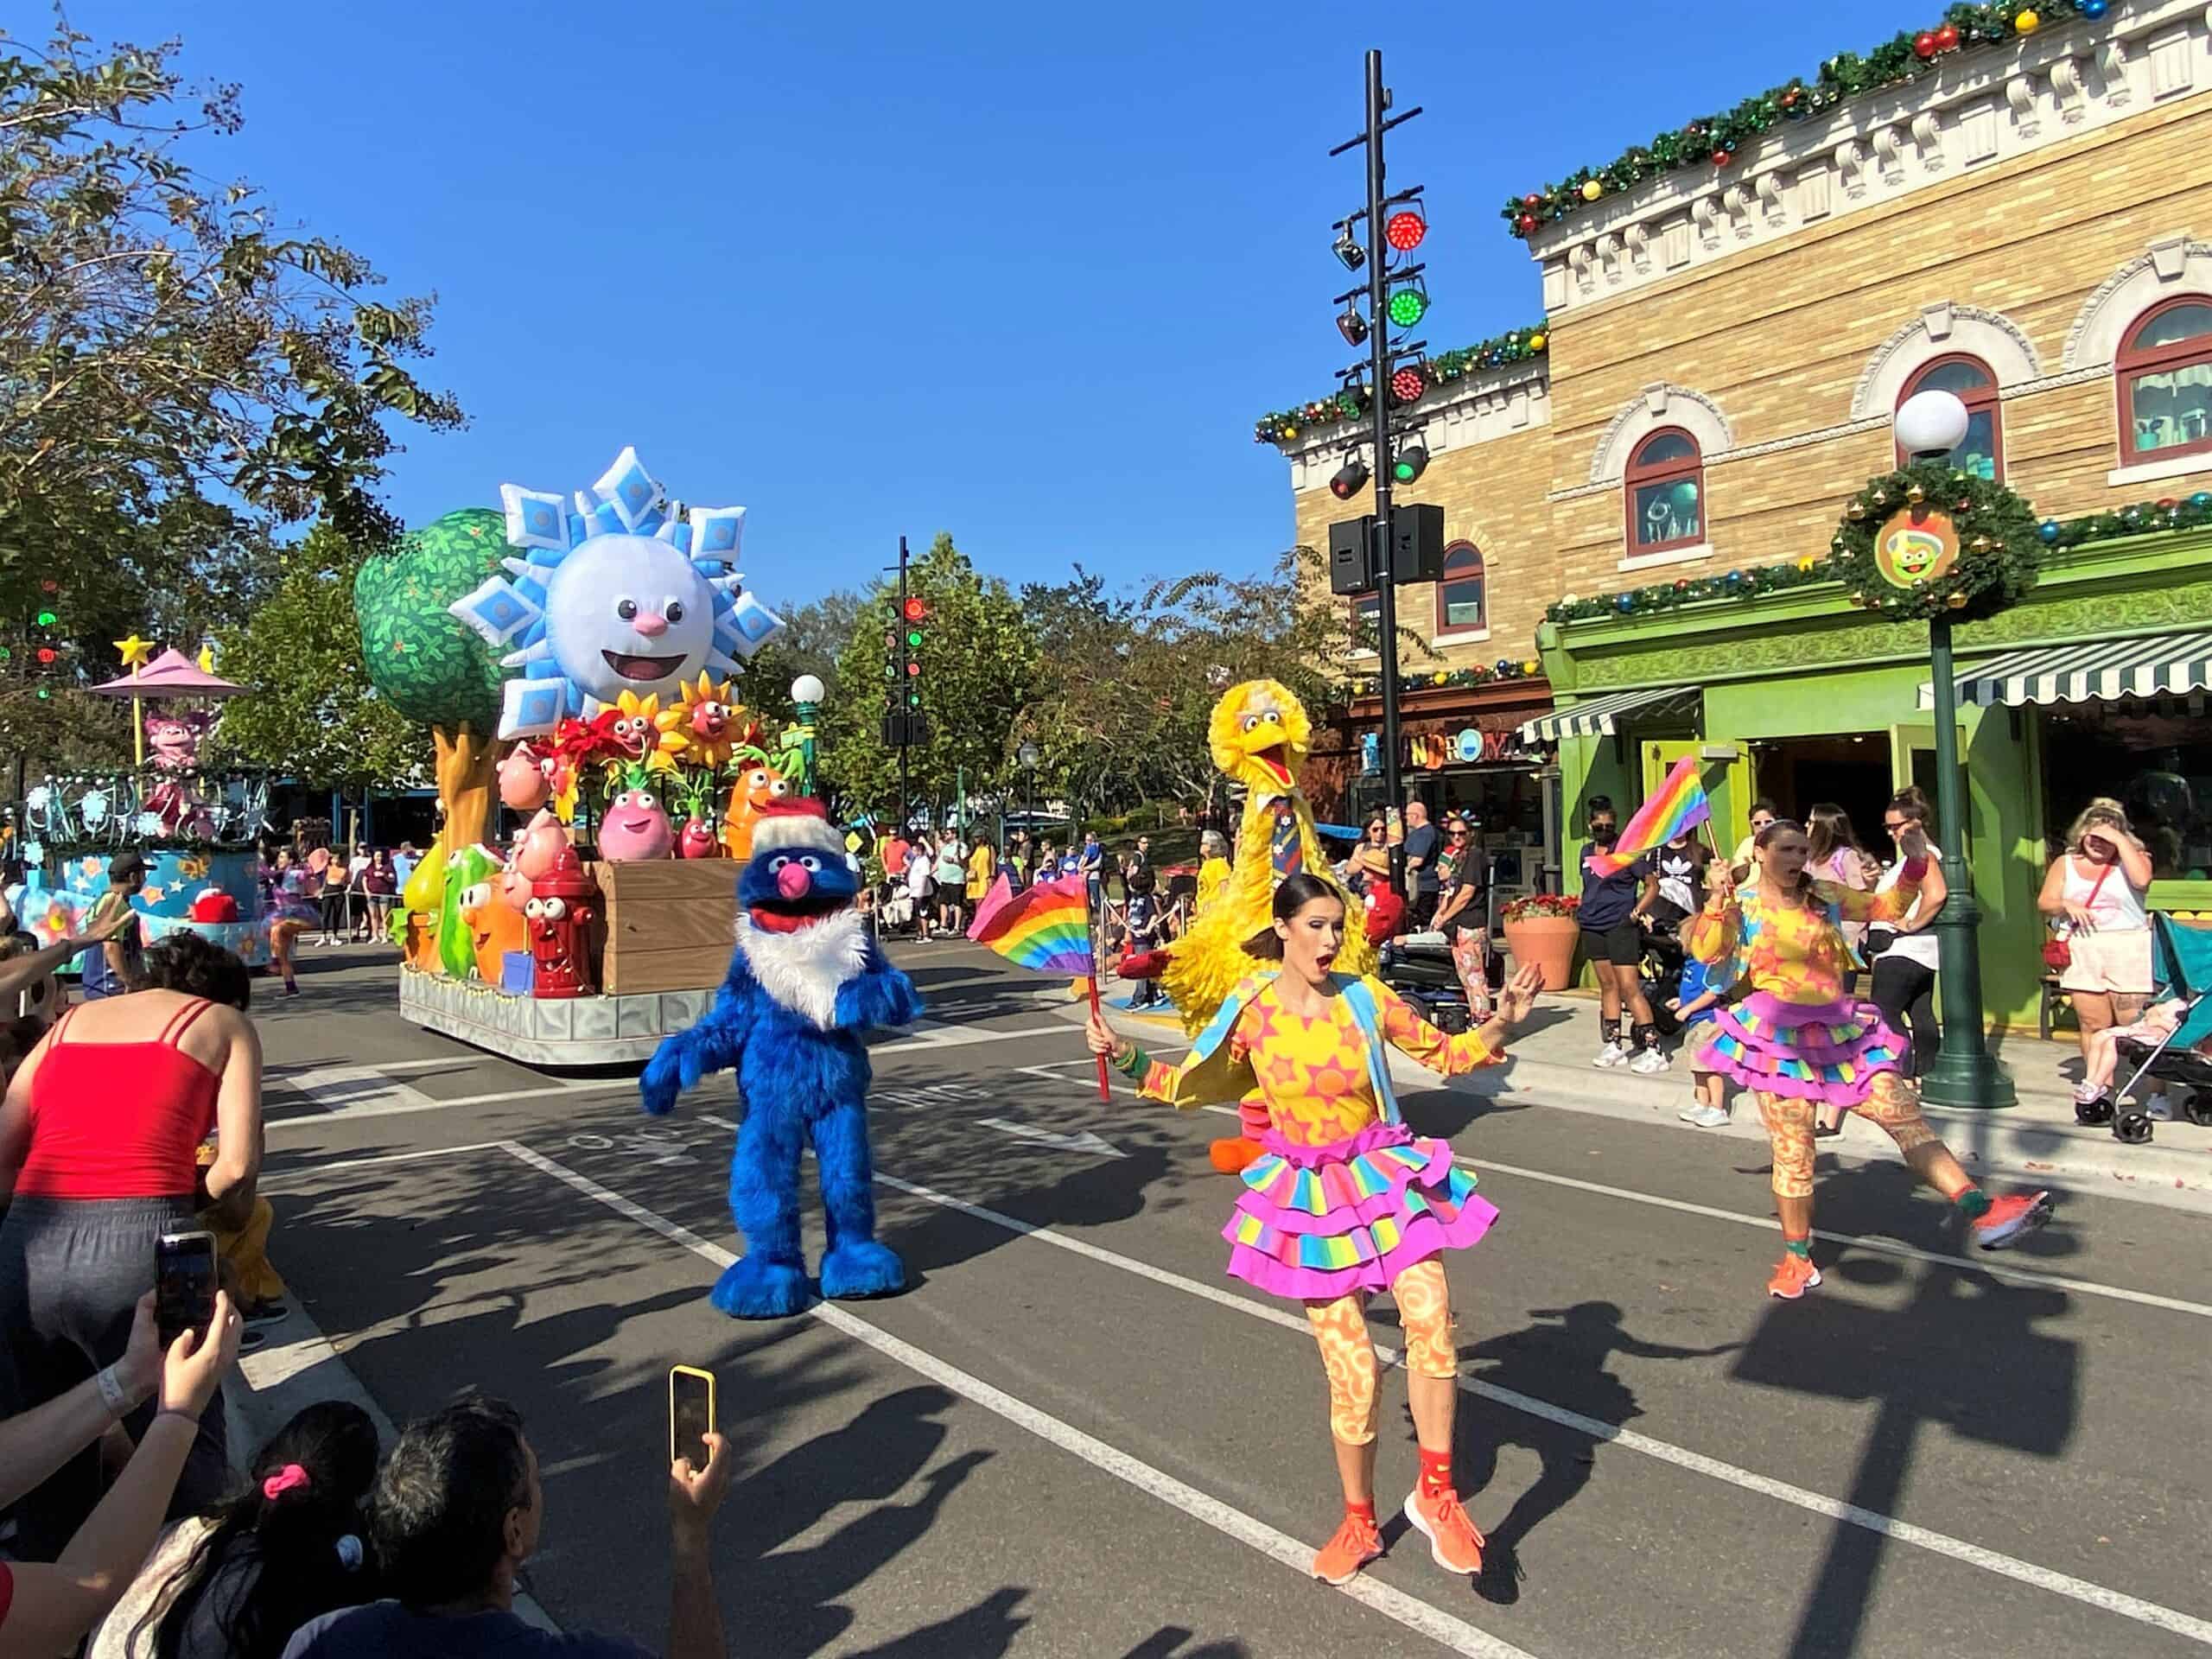 This photo is taken during the day inside Sesame Street Land at SeaWorld Orlando. Two female performers lead the parade dancing and wearing bright colored costumes of yellow and pink. Big Bird and Grover characters are behind them, and a large parade float with bright flowers and a large inflated snowflake are behind them.Sesame Street Christmas Parade